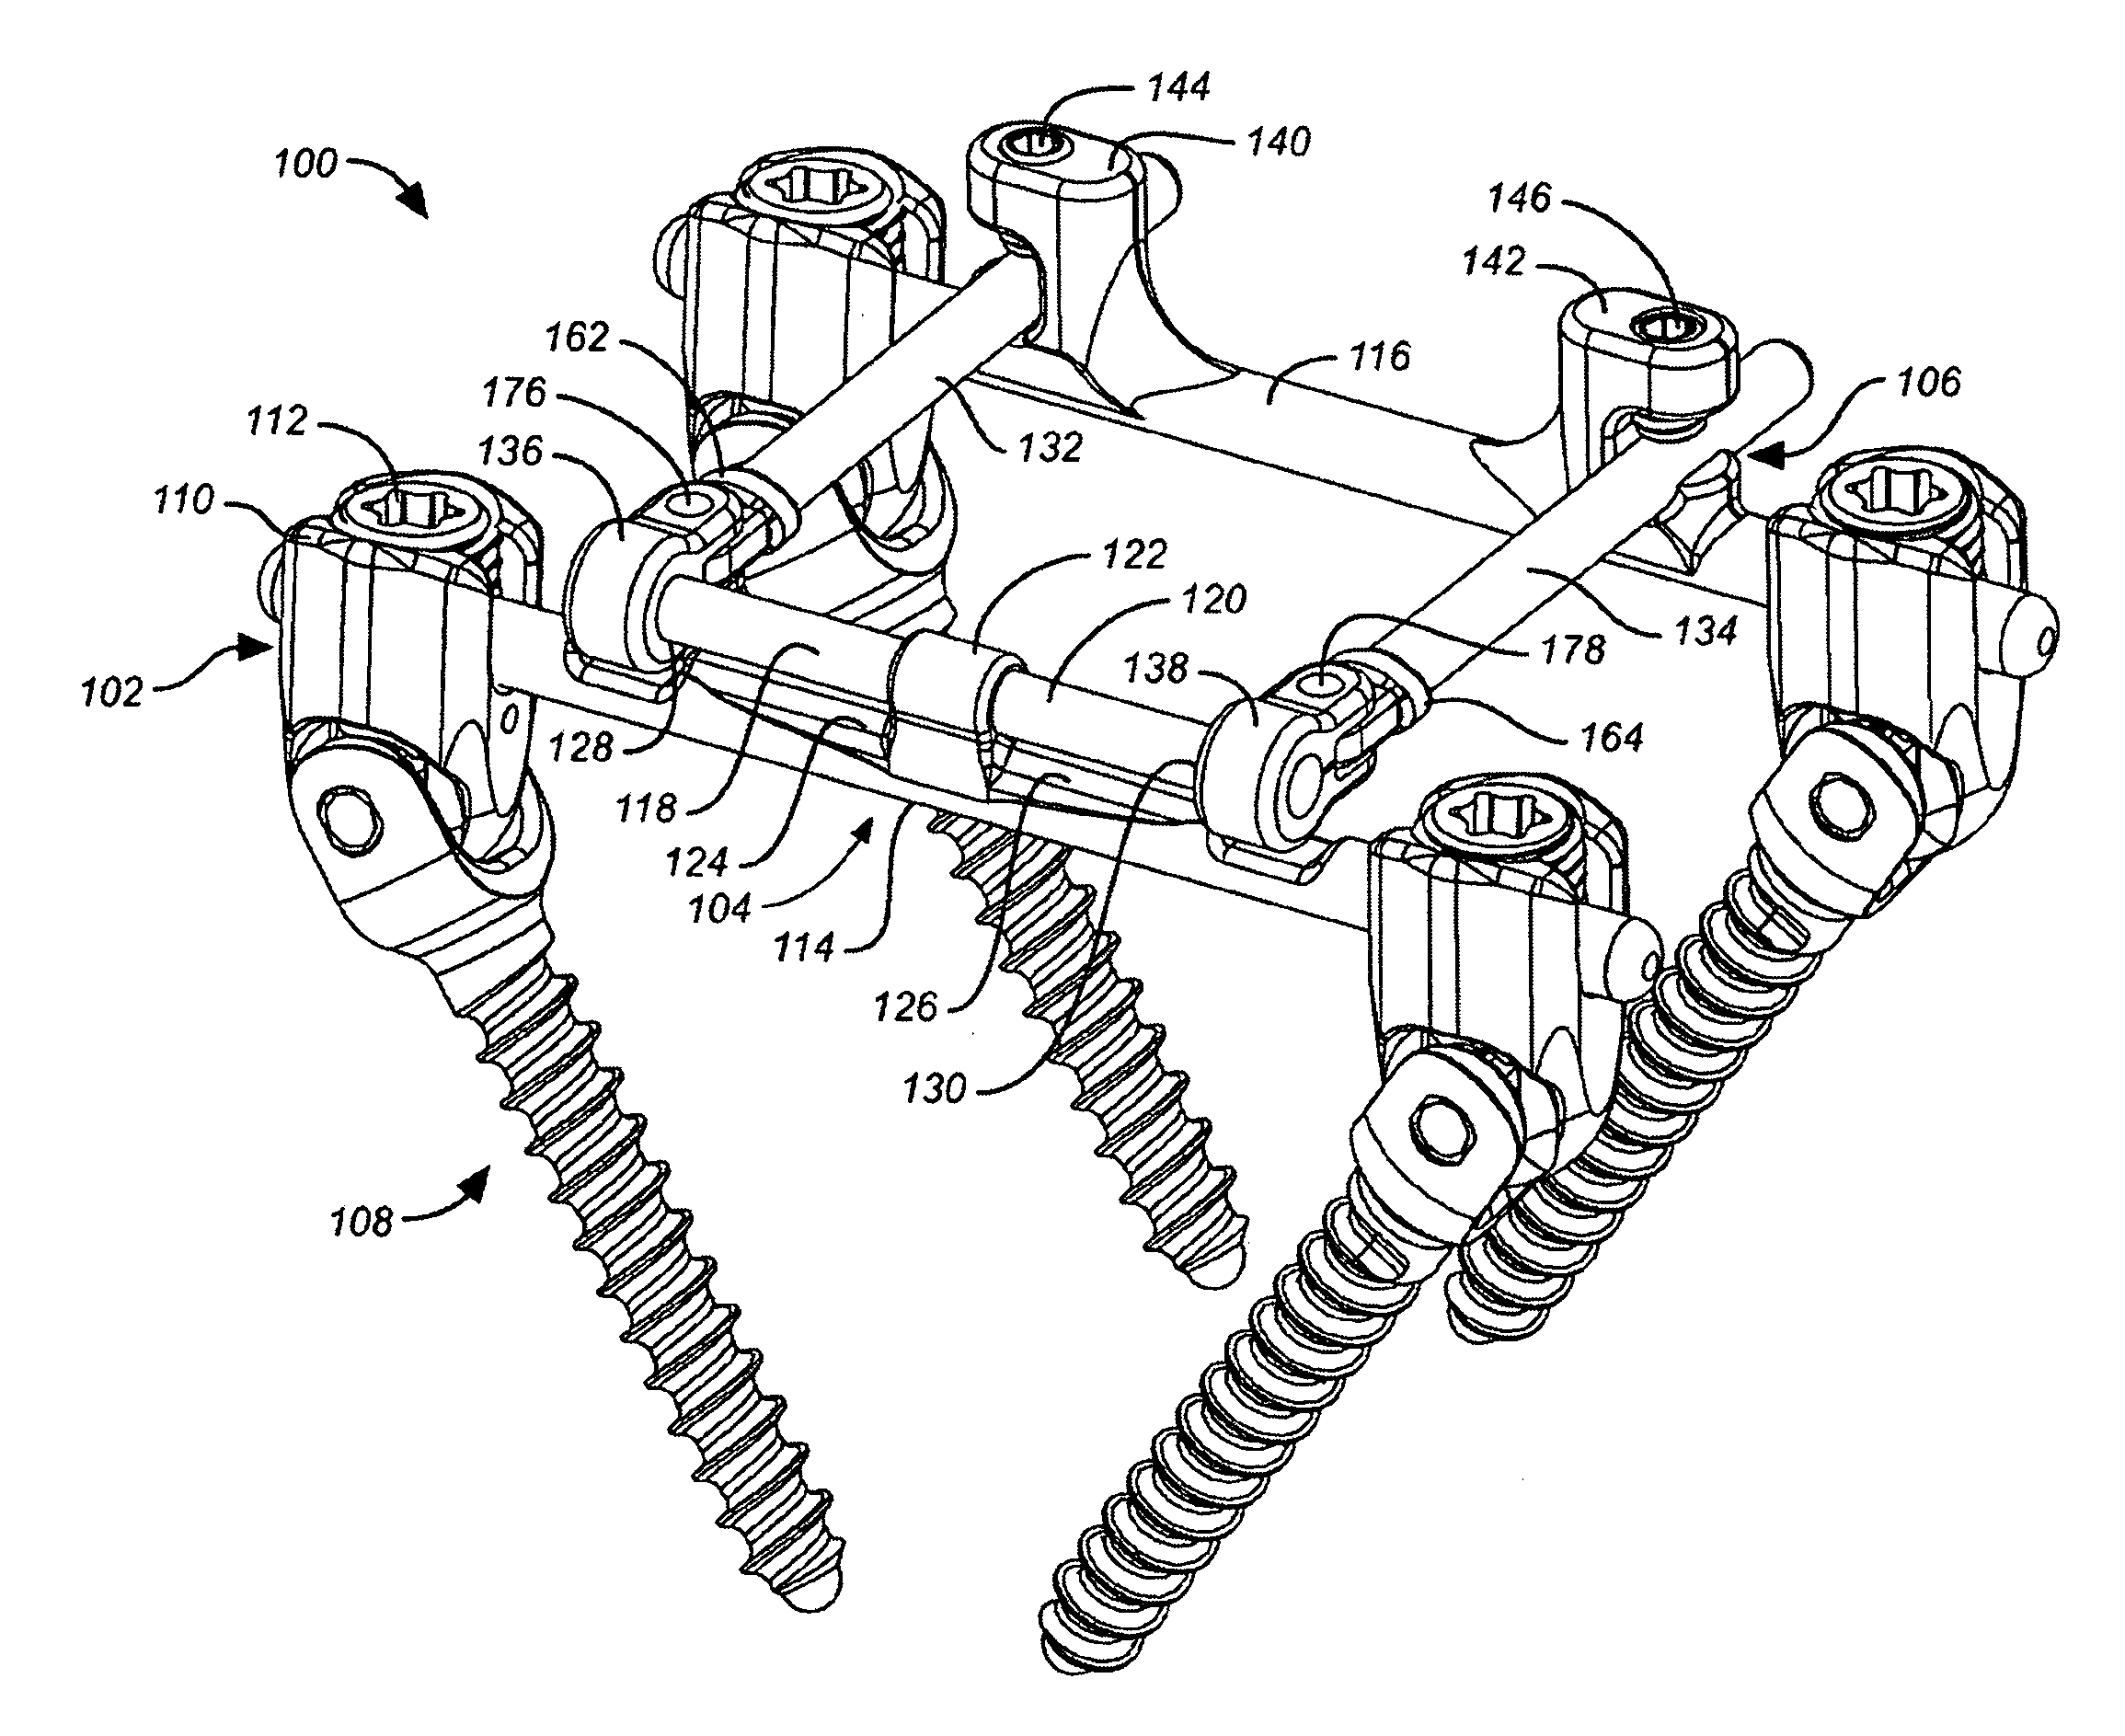 Deflection rod system for use with a vertebral fusion implant for dynamic stabilization and motion preservation spinal implantation system and method